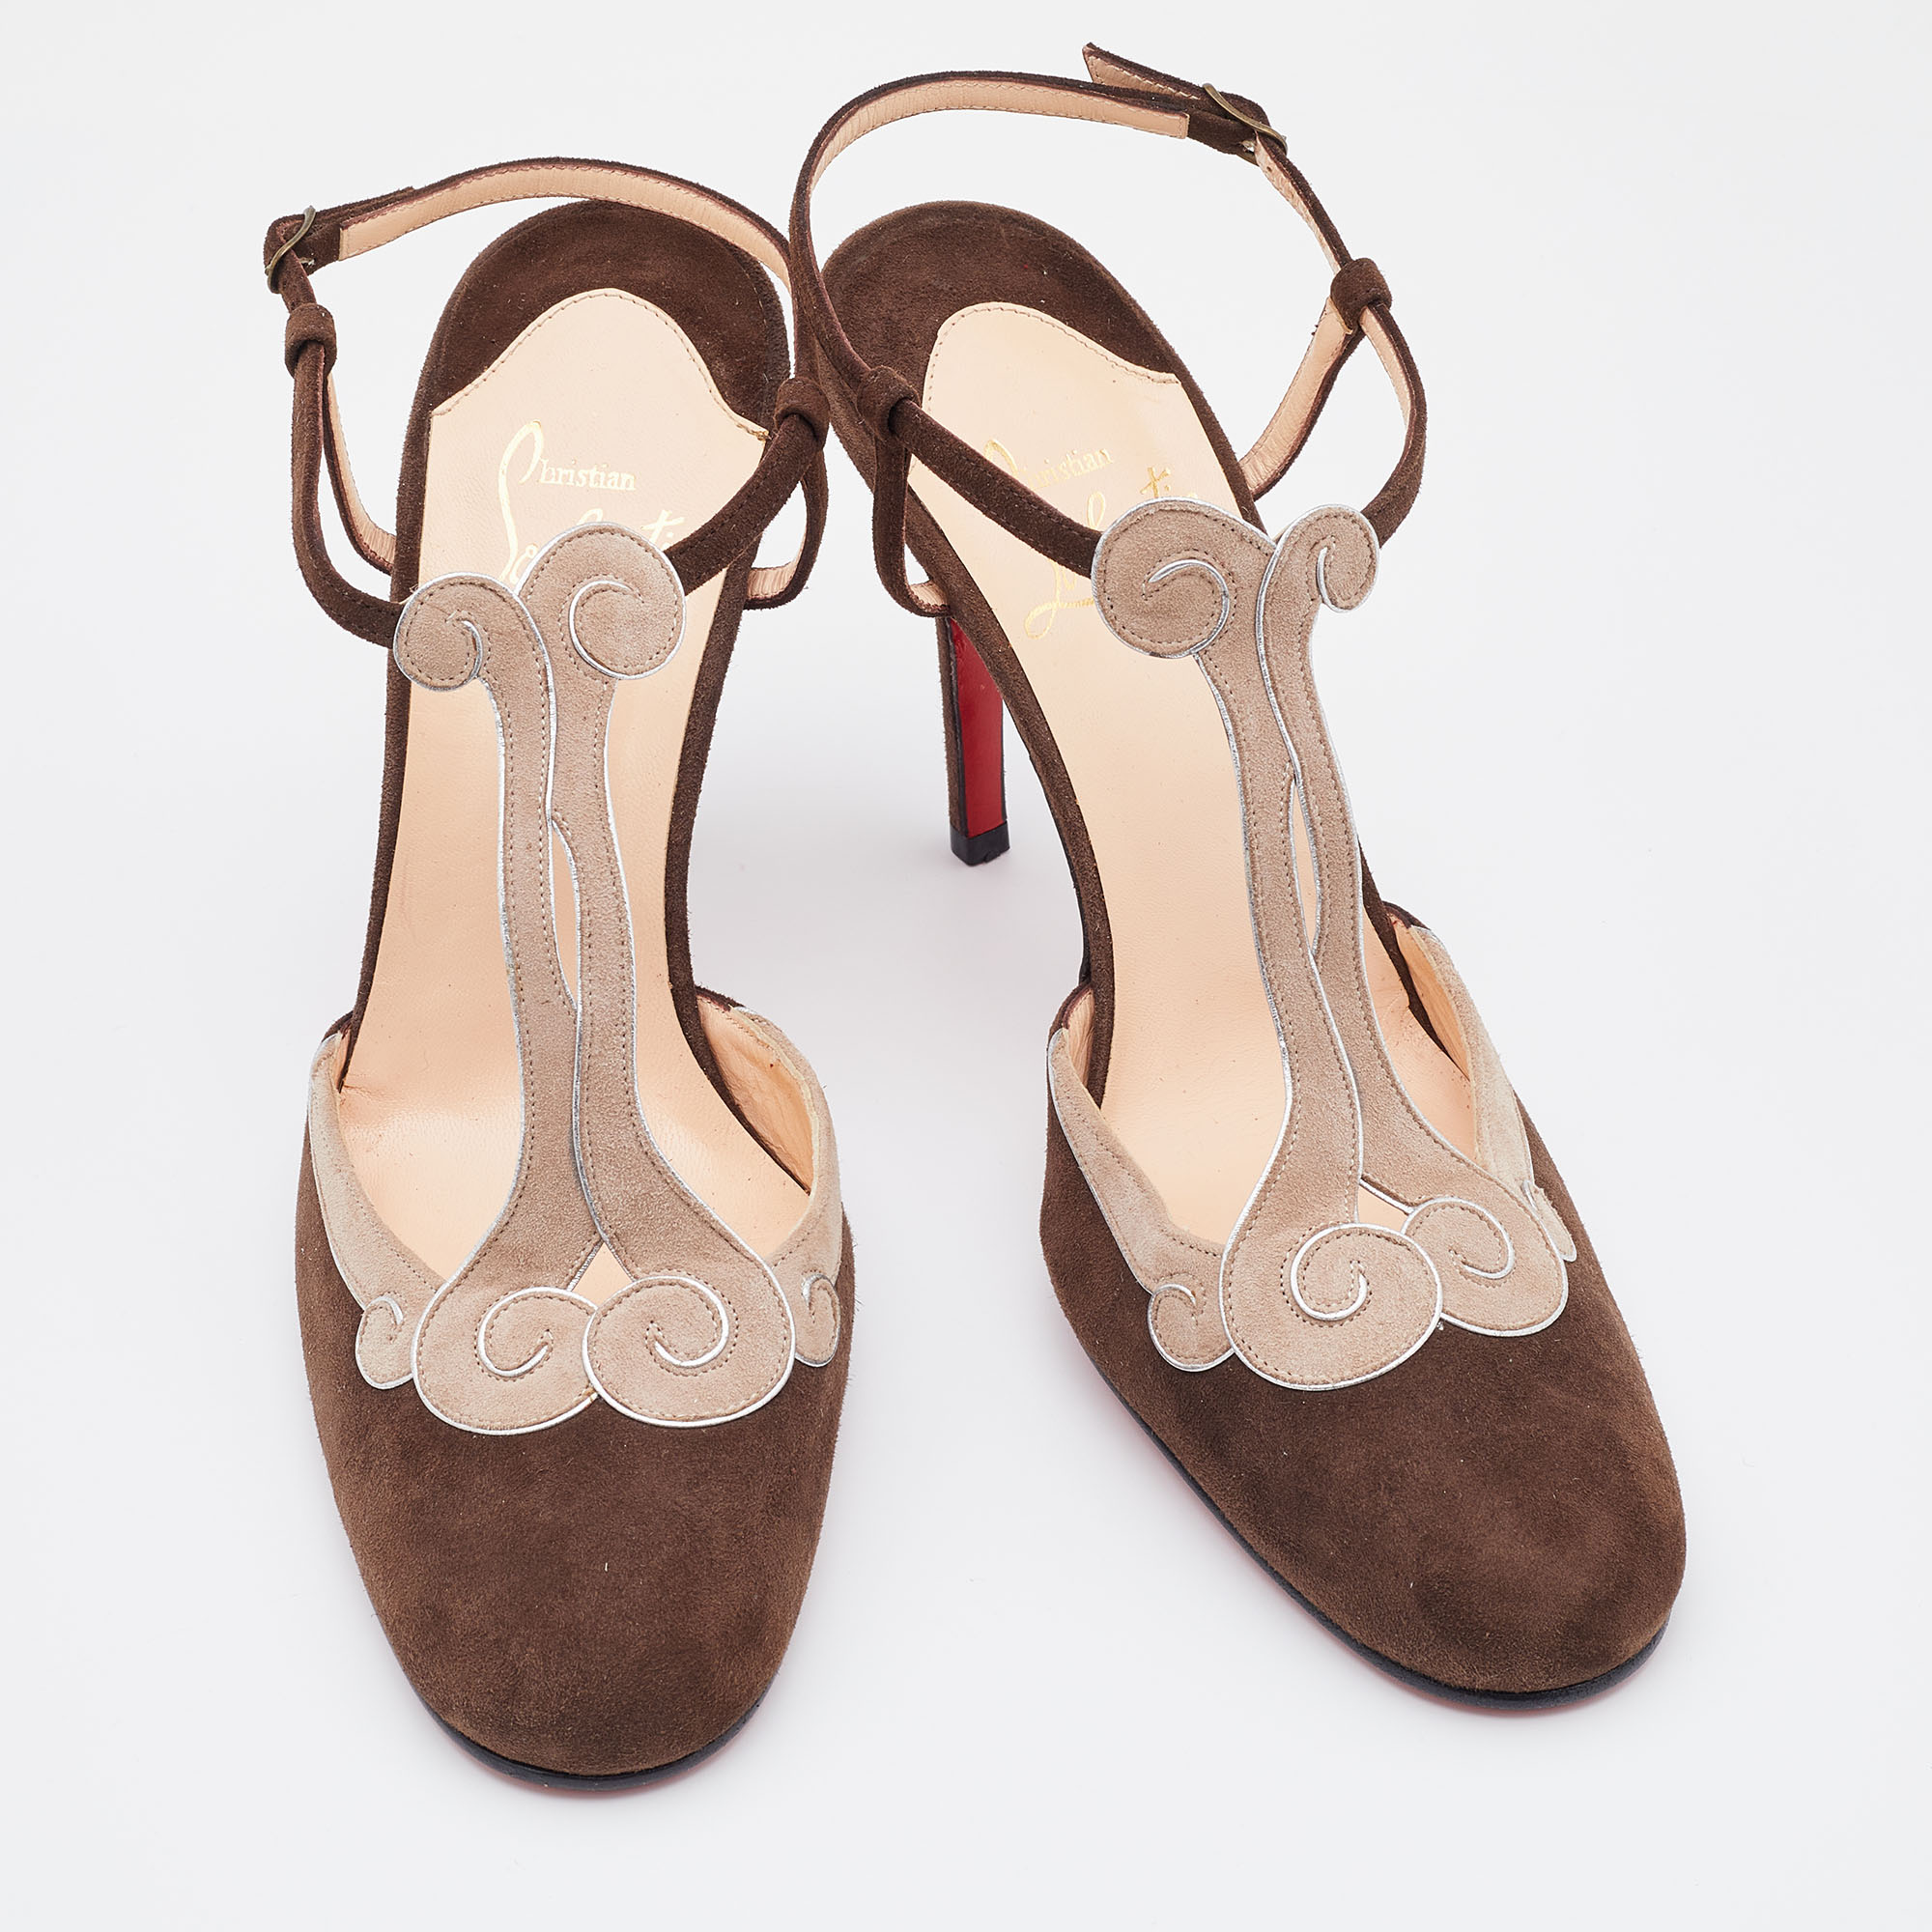 Christian Louboutin Choco Brown/Beige Suede T Strap Ankle Strap Sandals Size 39